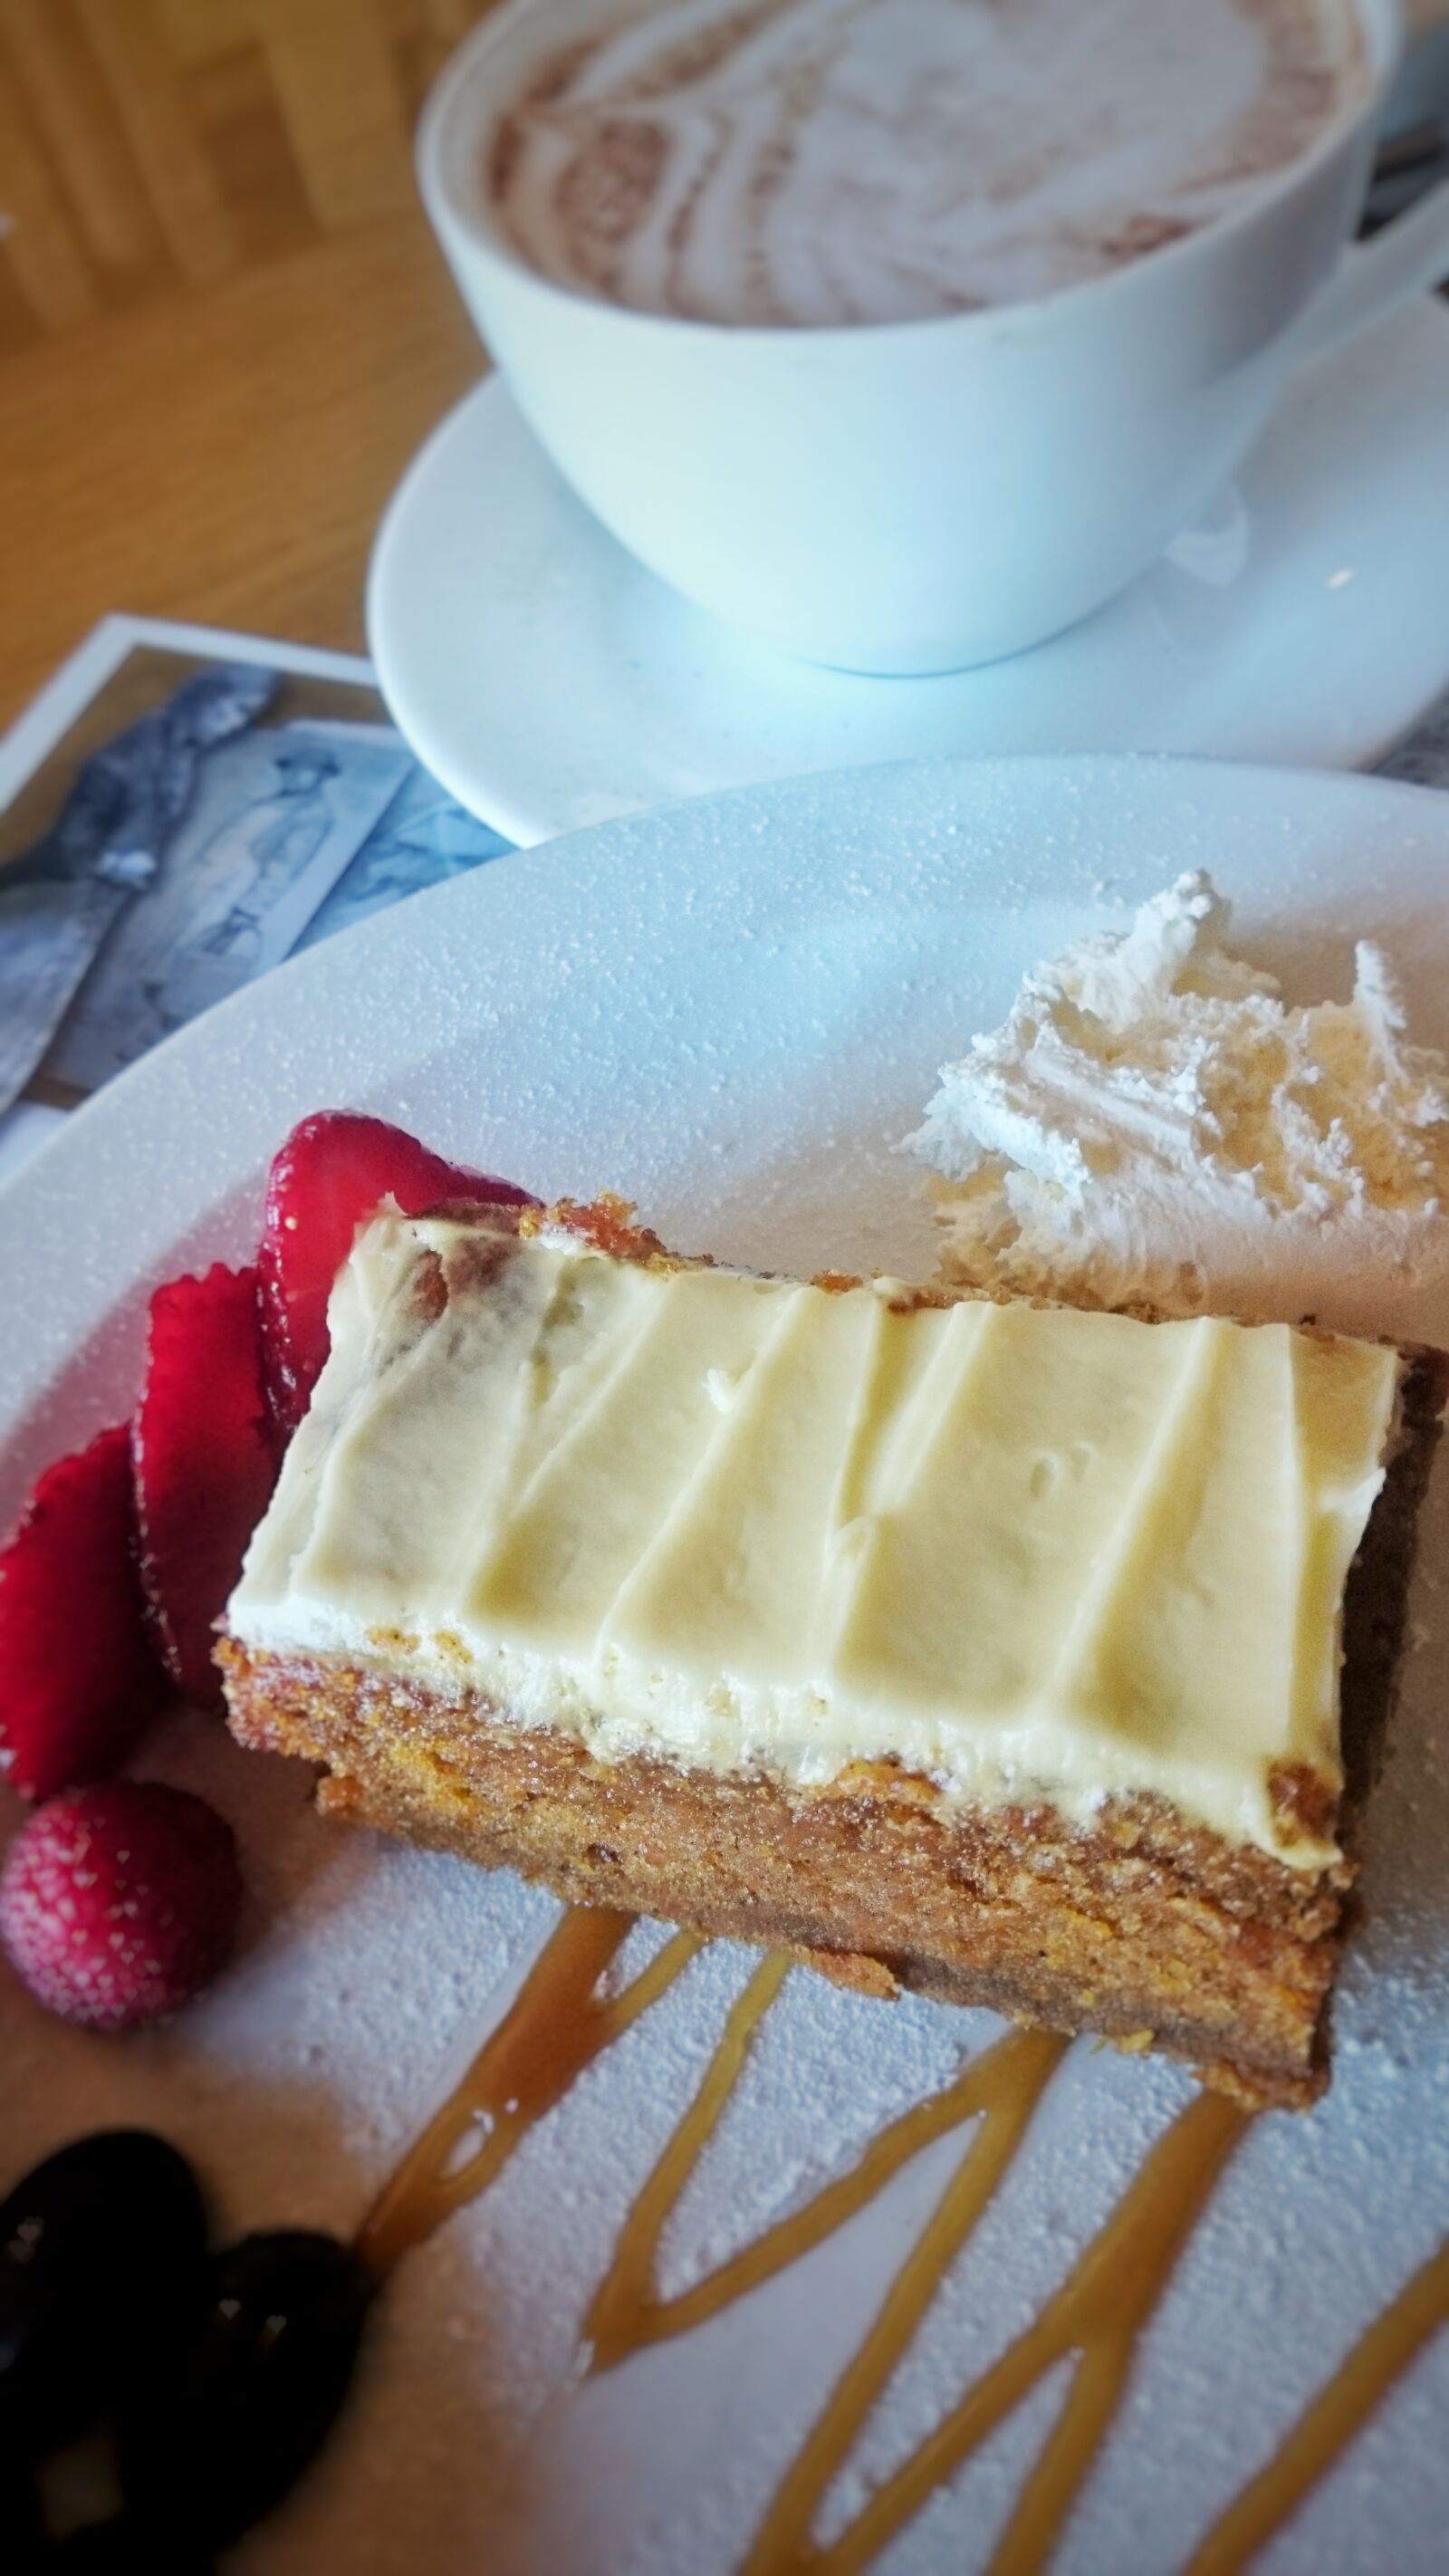 Sony Xperia Z3 Compact sample photo. Cafe, carrot, cake, chocolate photography